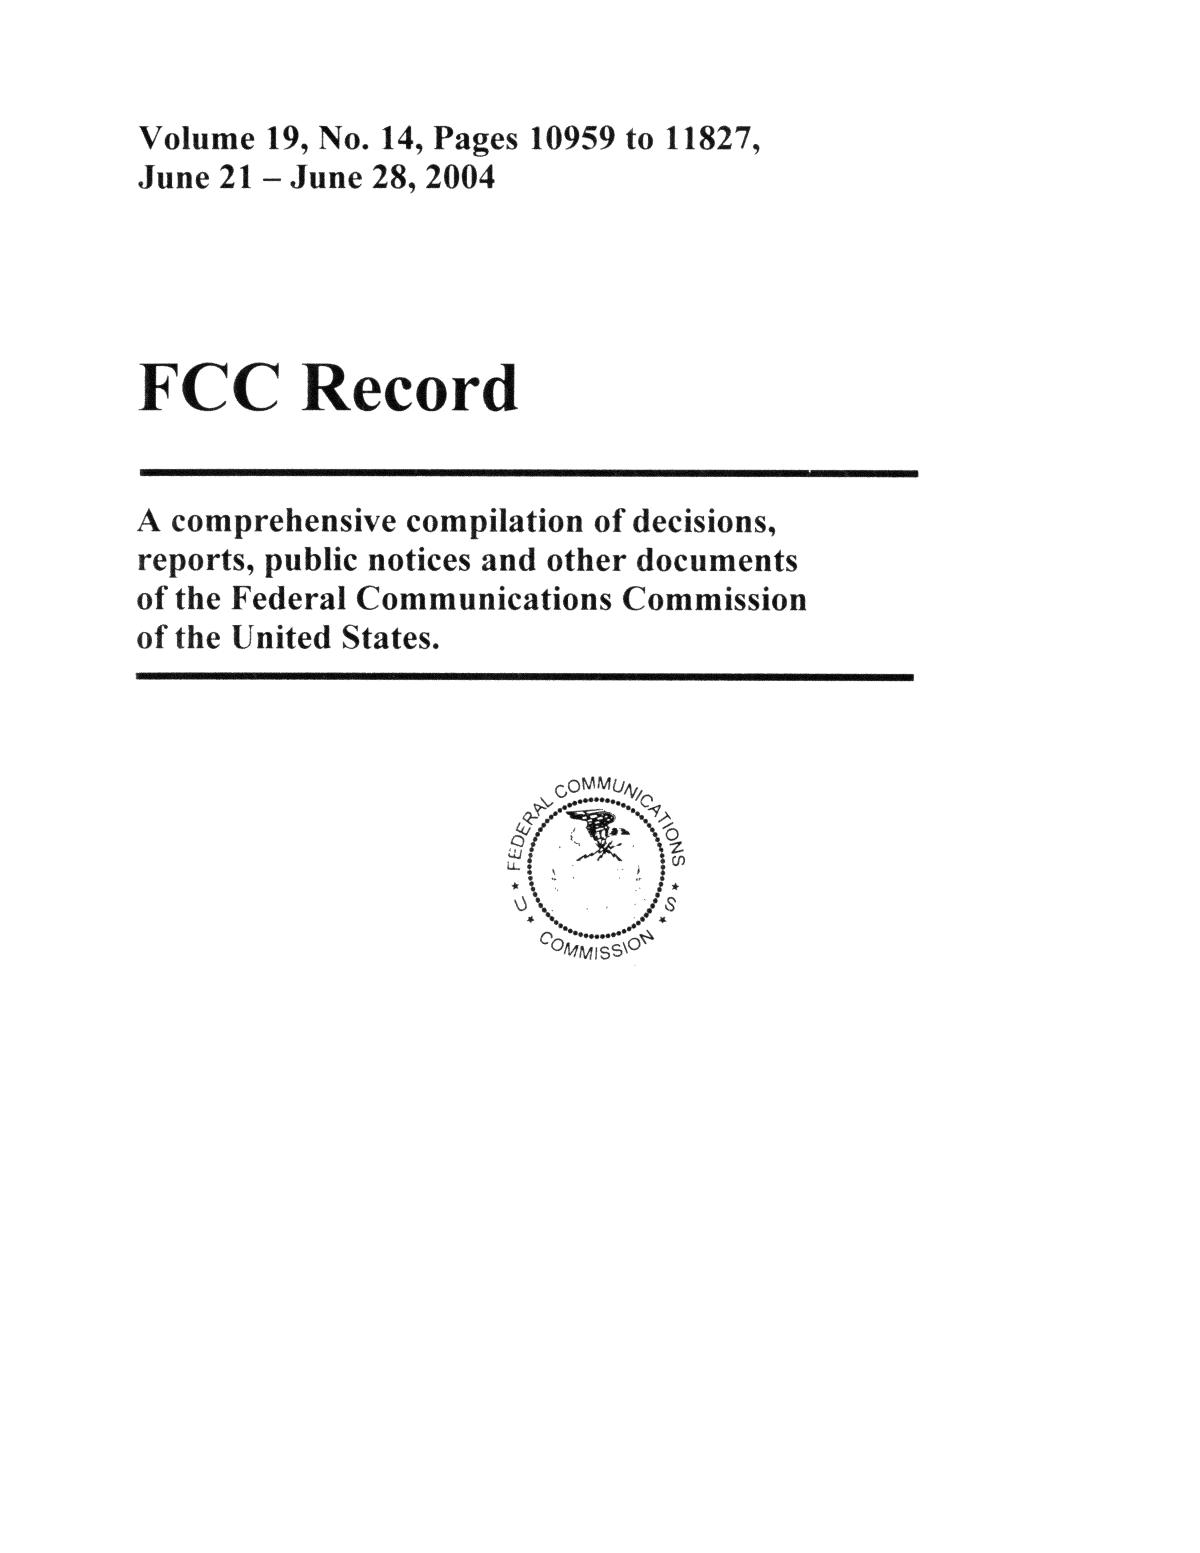 FCC Record, Volume 19, No. 14, Pages 10959 to 11827, June 21 - June 28, 2004
                                                
                                                    Front Cover
                                                